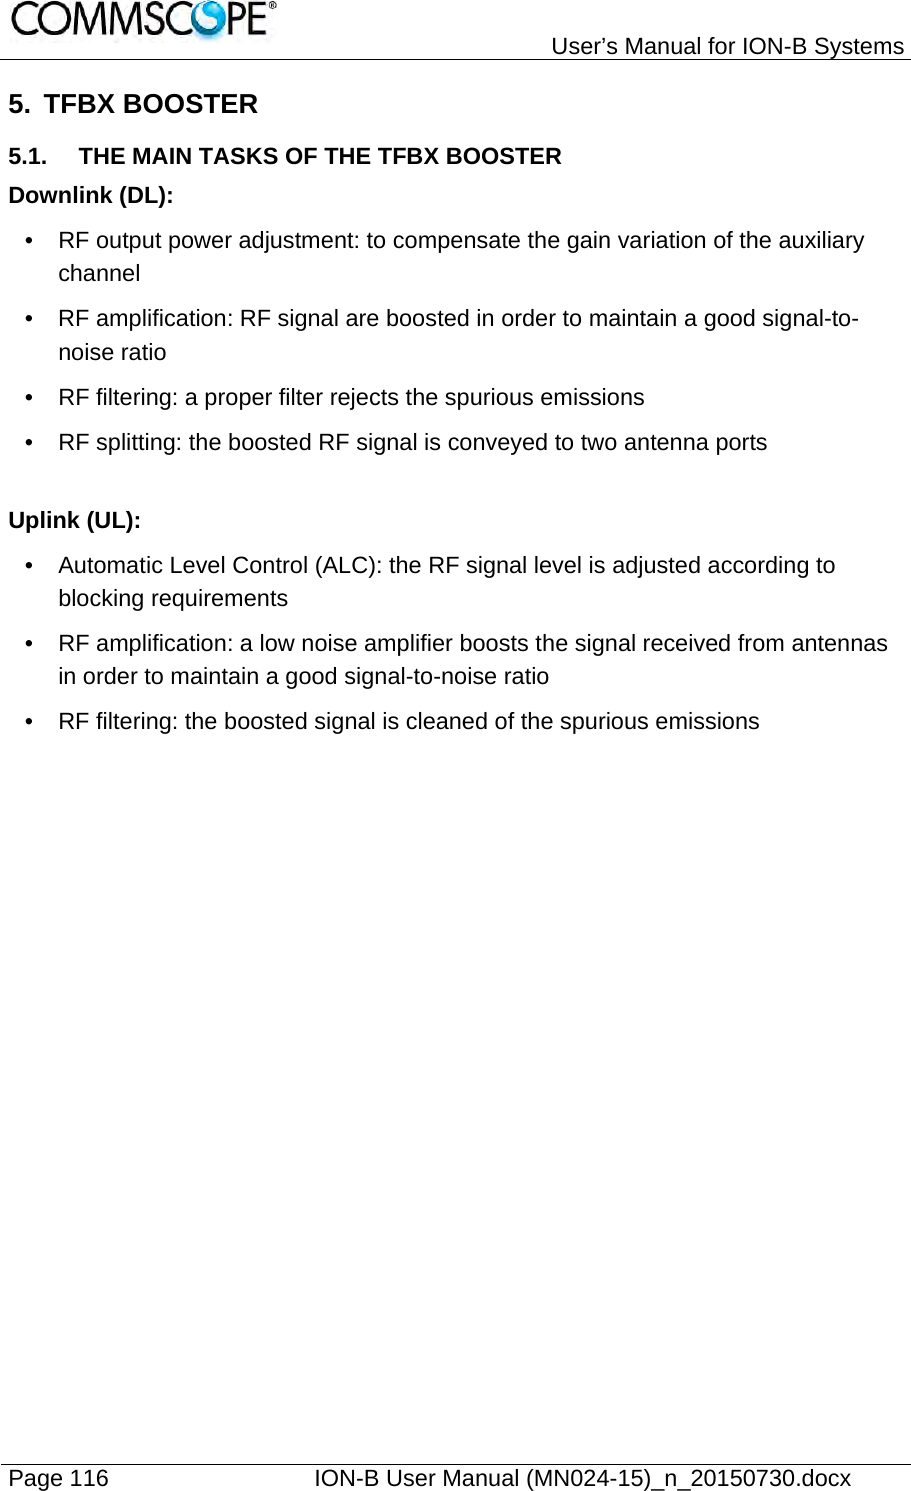   User’s Manual for ION-B Systems Page 116    ION-B User Manual (MN024-15)_n_20150730.docx  5. TFBX BOOSTER 5.1.  THE MAIN TASKS OF THE TFBX BOOSTER Downlink (DL): •  RF output power adjustment: to compensate the gain variation of the auxiliary channel •  RF amplification: RF signal are boosted in order to maintain a good signal-to-noise ratio •  RF filtering: a proper filter rejects the spurious emissions •  RF splitting: the boosted RF signal is conveyed to two antenna ports  Uplink (UL): •  Automatic Level Control (ALC): the RF signal level is adjusted according to blocking requirements •  RF amplification: a low noise amplifier boosts the signal received from antennas in order to maintain a good signal-to-noise ratio •  RF filtering: the boosted signal is cleaned of the spurious emissions  